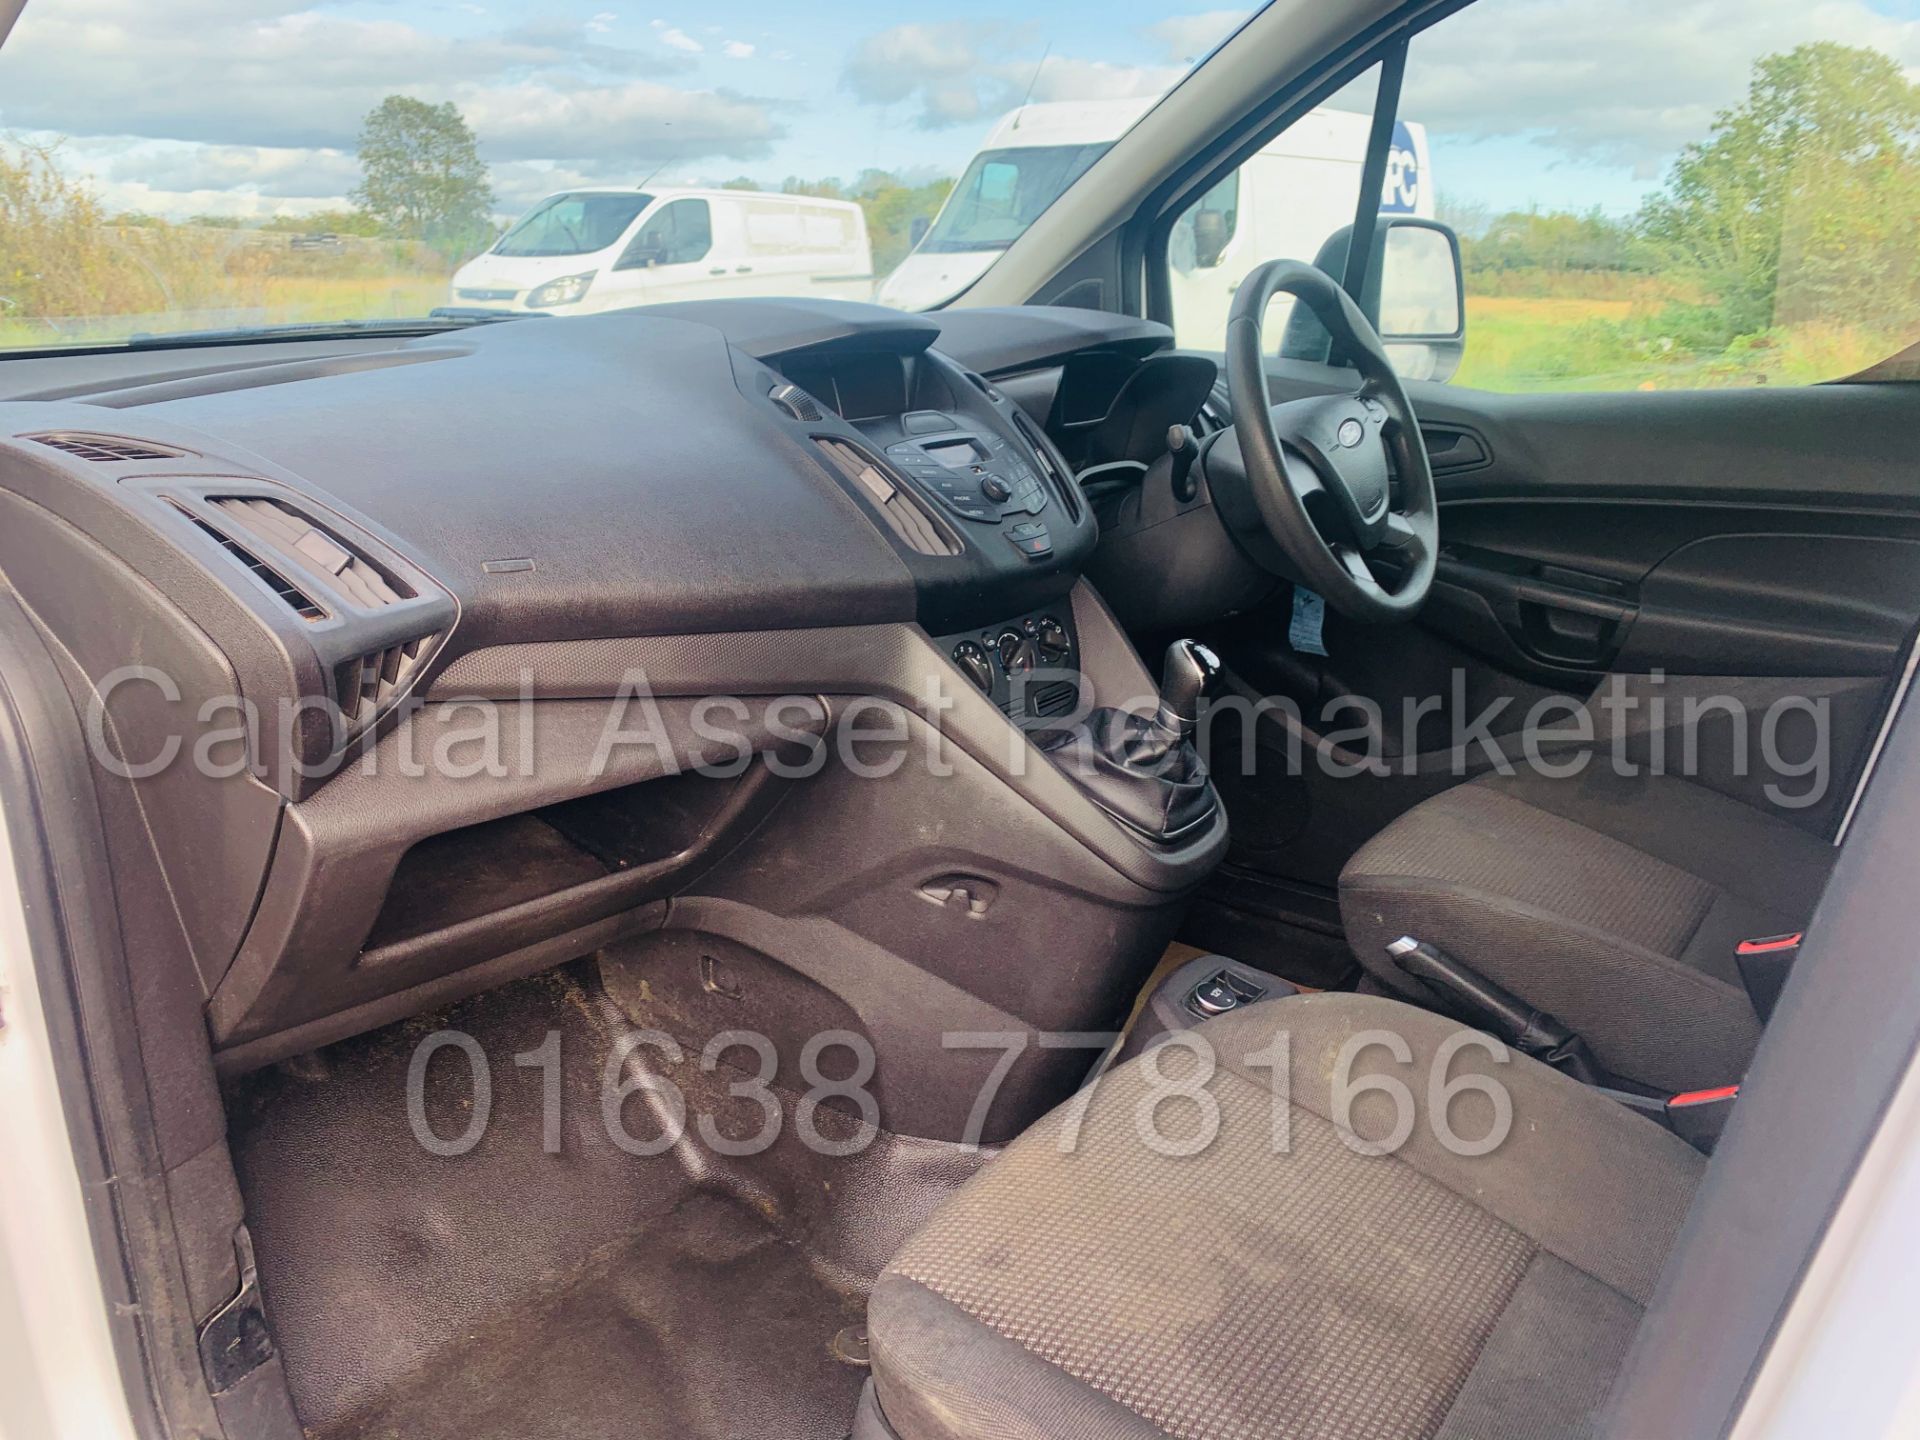 (ON SALE) FORD TRANSIT CONNECT *LWB - 5 SEATER CREW VAN* (2018 - EURO 6) 1.5 TDCI *A/C* (1 OWNER) - Image 18 of 40